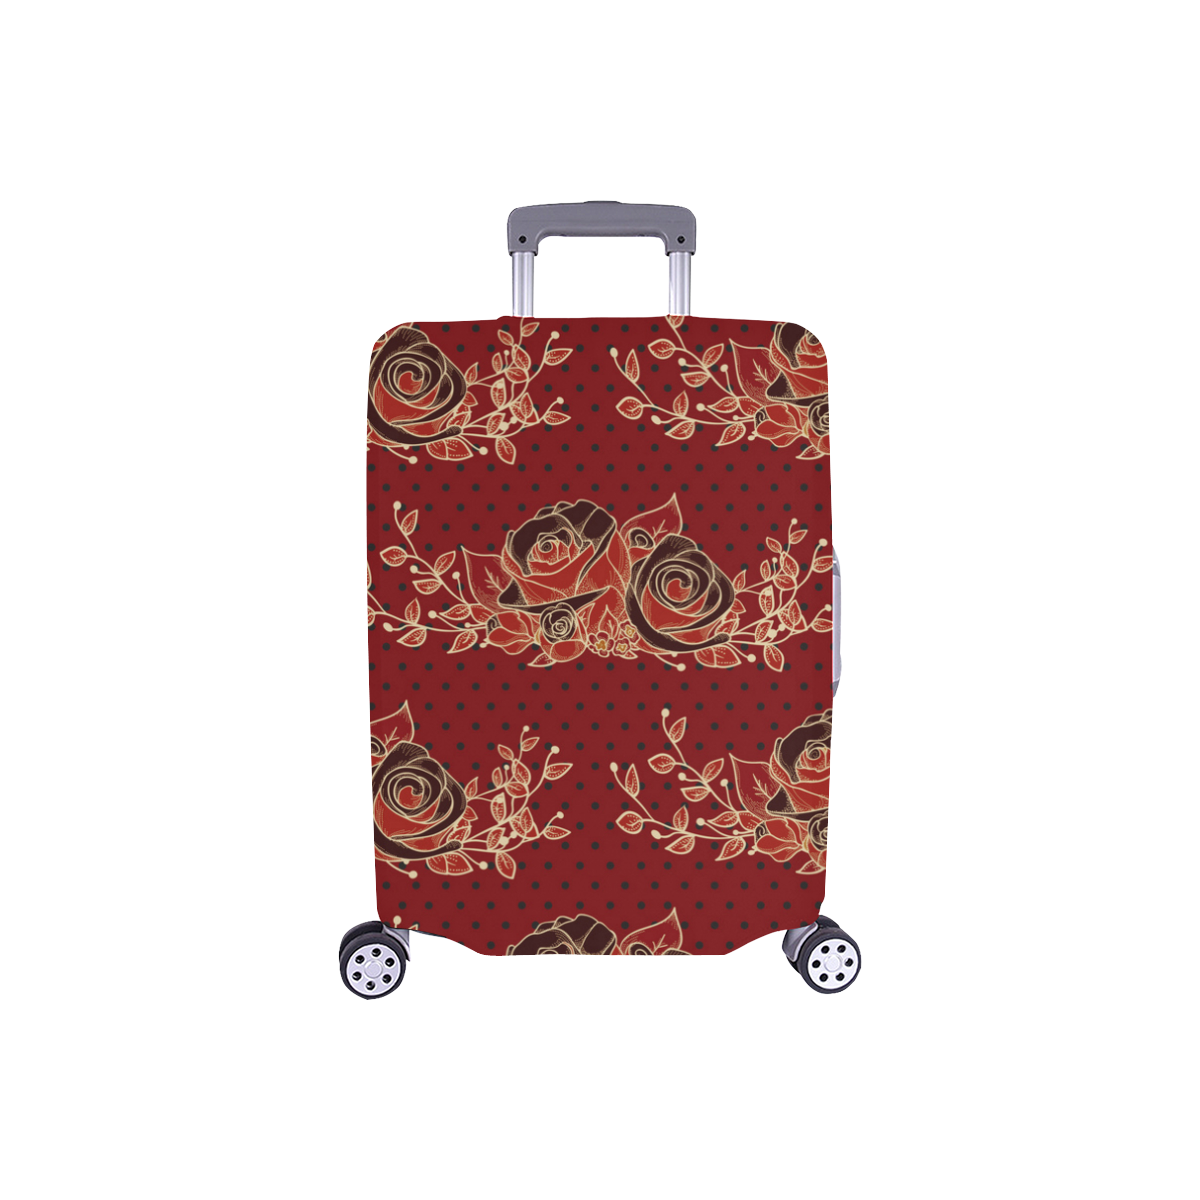 Dotwork Roses Bouquet - Dark Red Blck Luggage Cover/Small 18"-21"